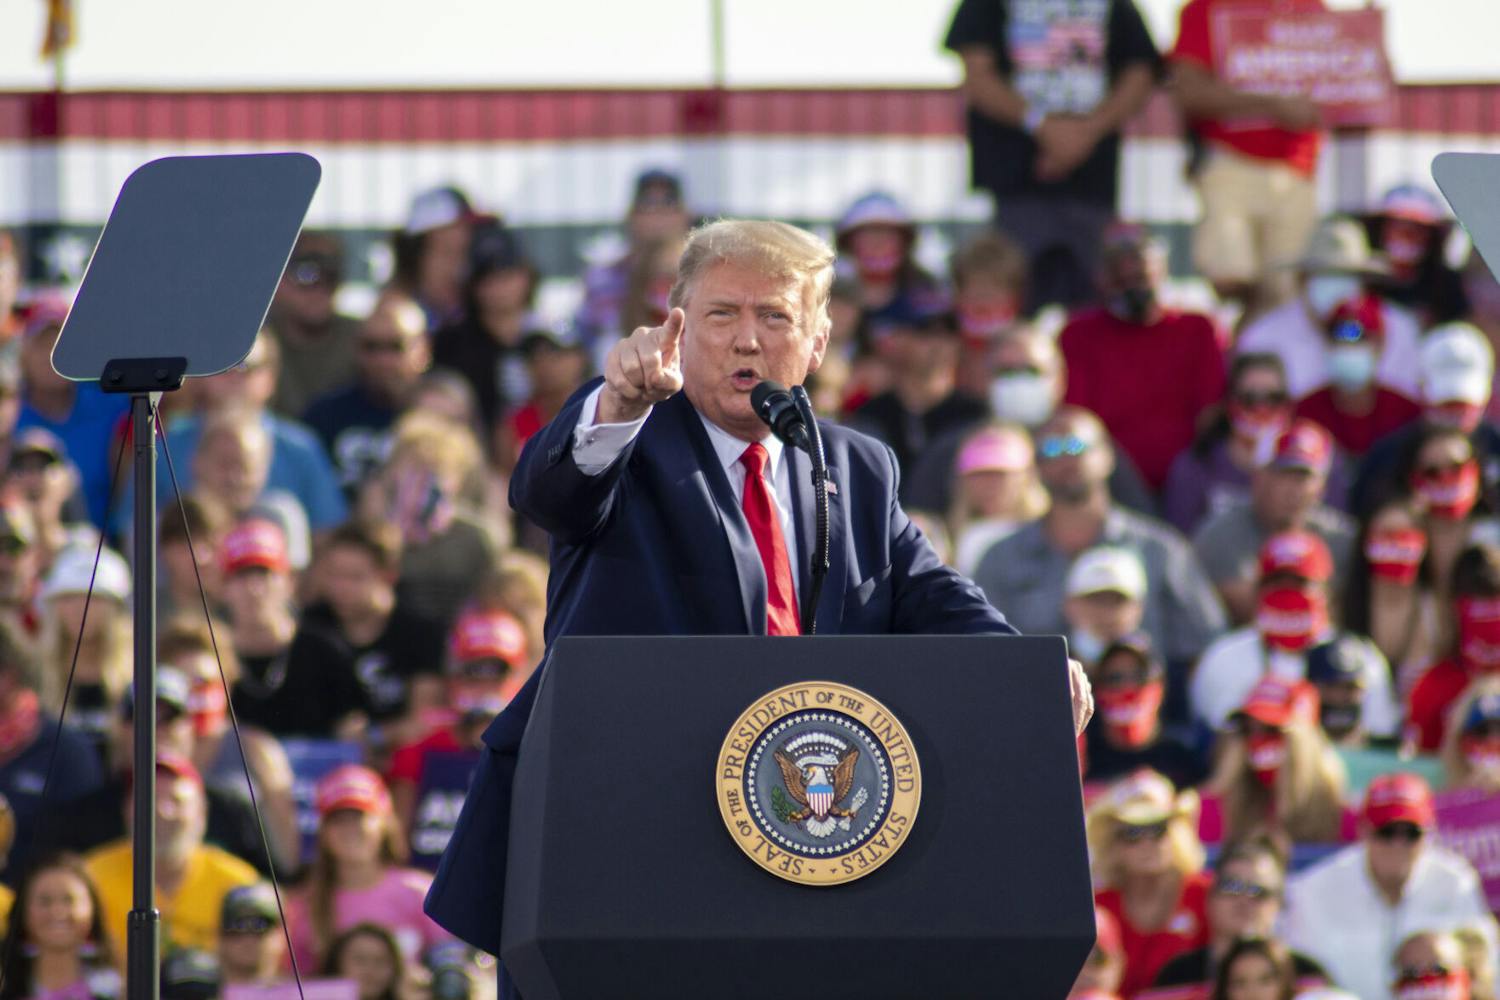 President Donald Trump points his finger at the crowd during his campaign rally at the Ocala International Airport on Friday, Oct. 16, 2020.